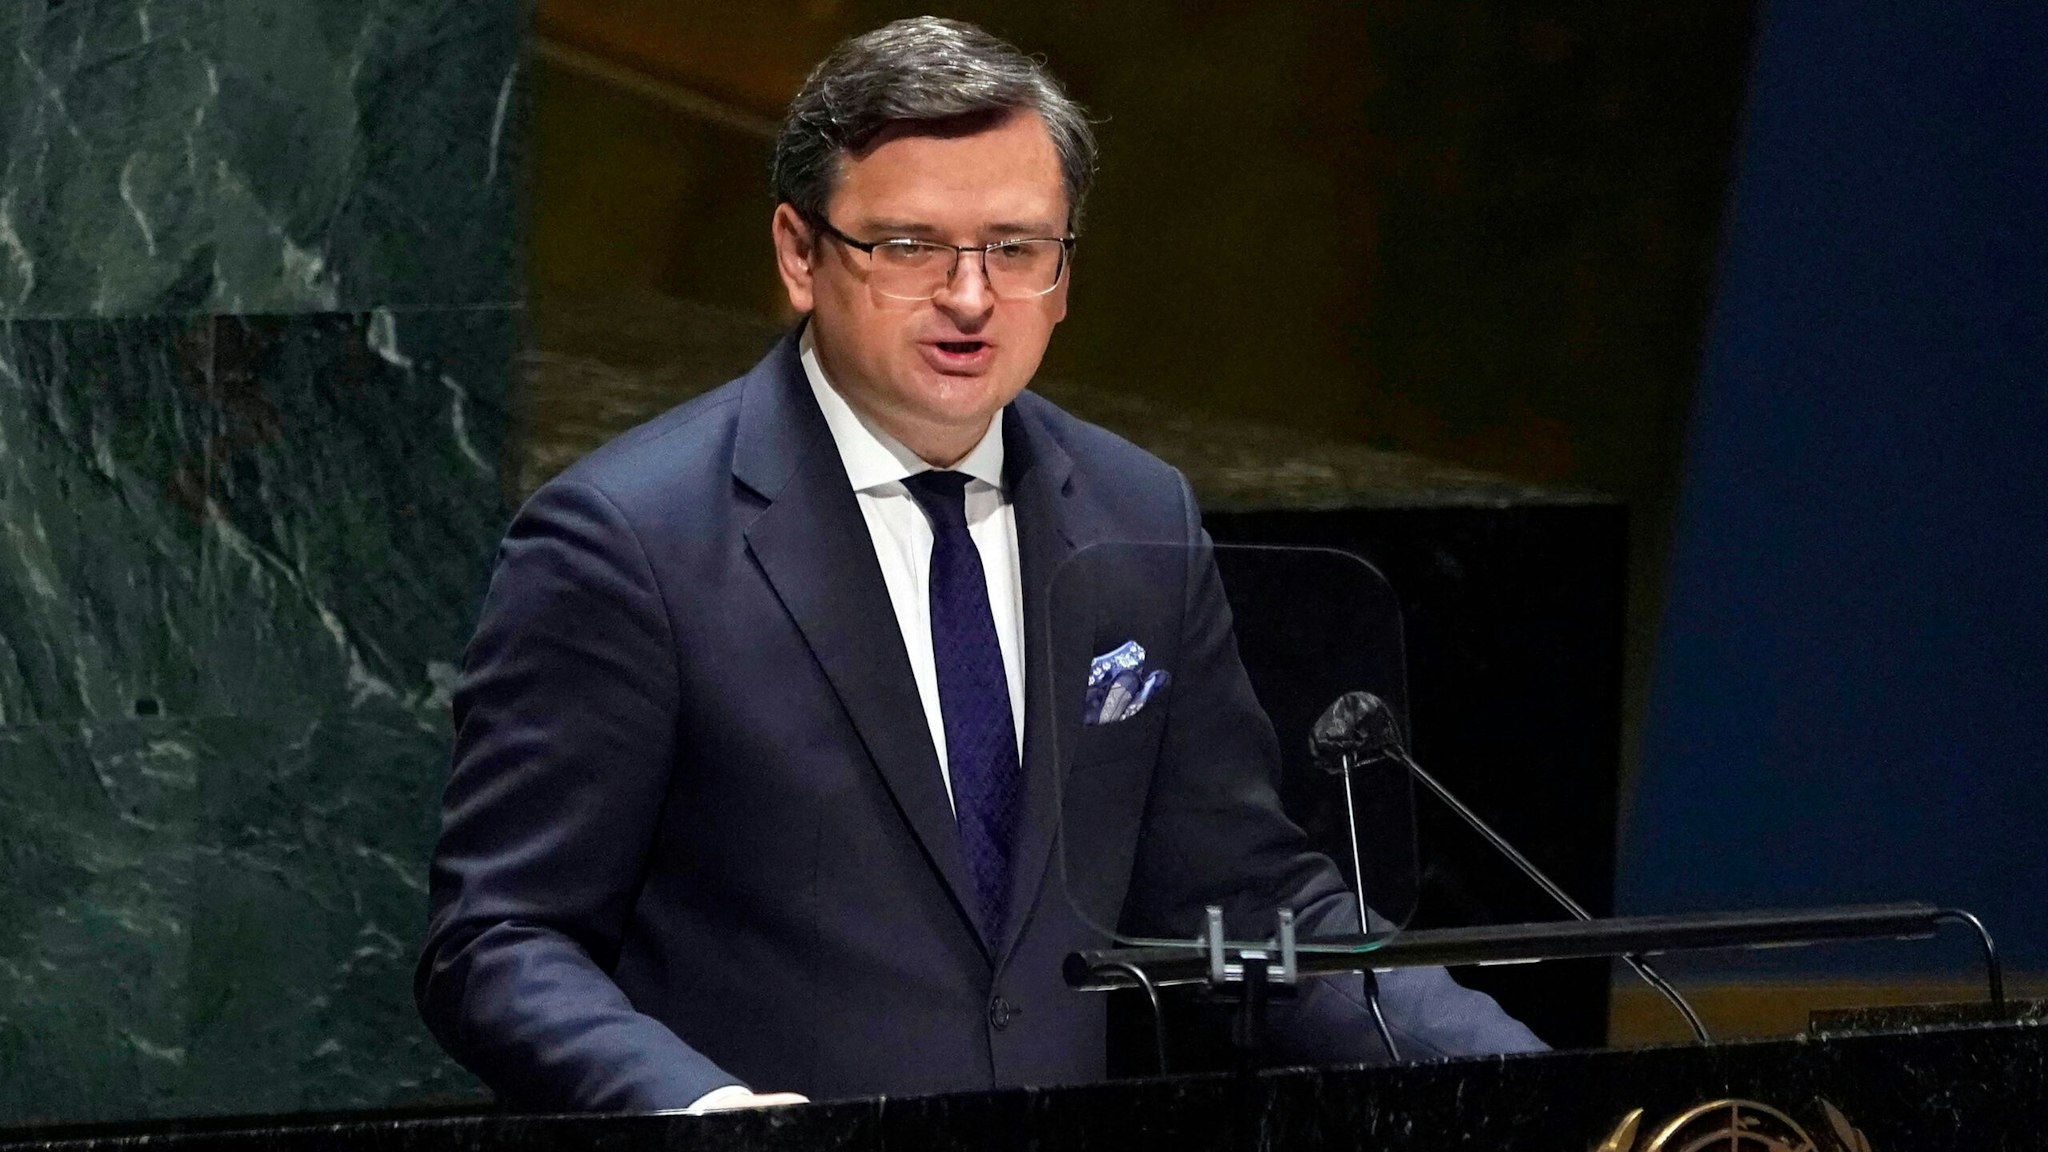 Ukrainian Foreign Minister Dmytro Kuleba speaks at the General Assembly 58th plenary meeting in New York on February 23, 2022, on the Russia-Ukraine conflict.